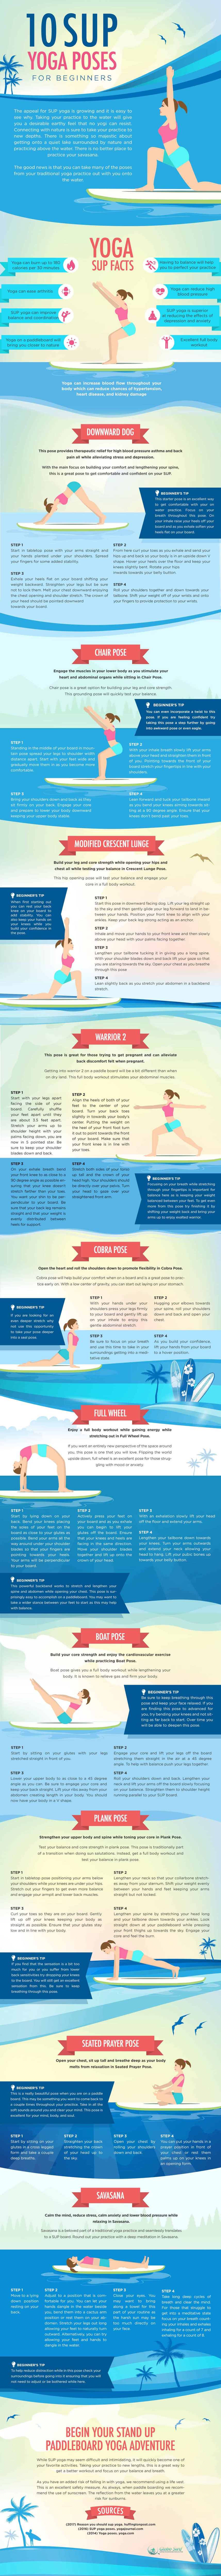 SUP-Yoga-Poses-For-Beginners